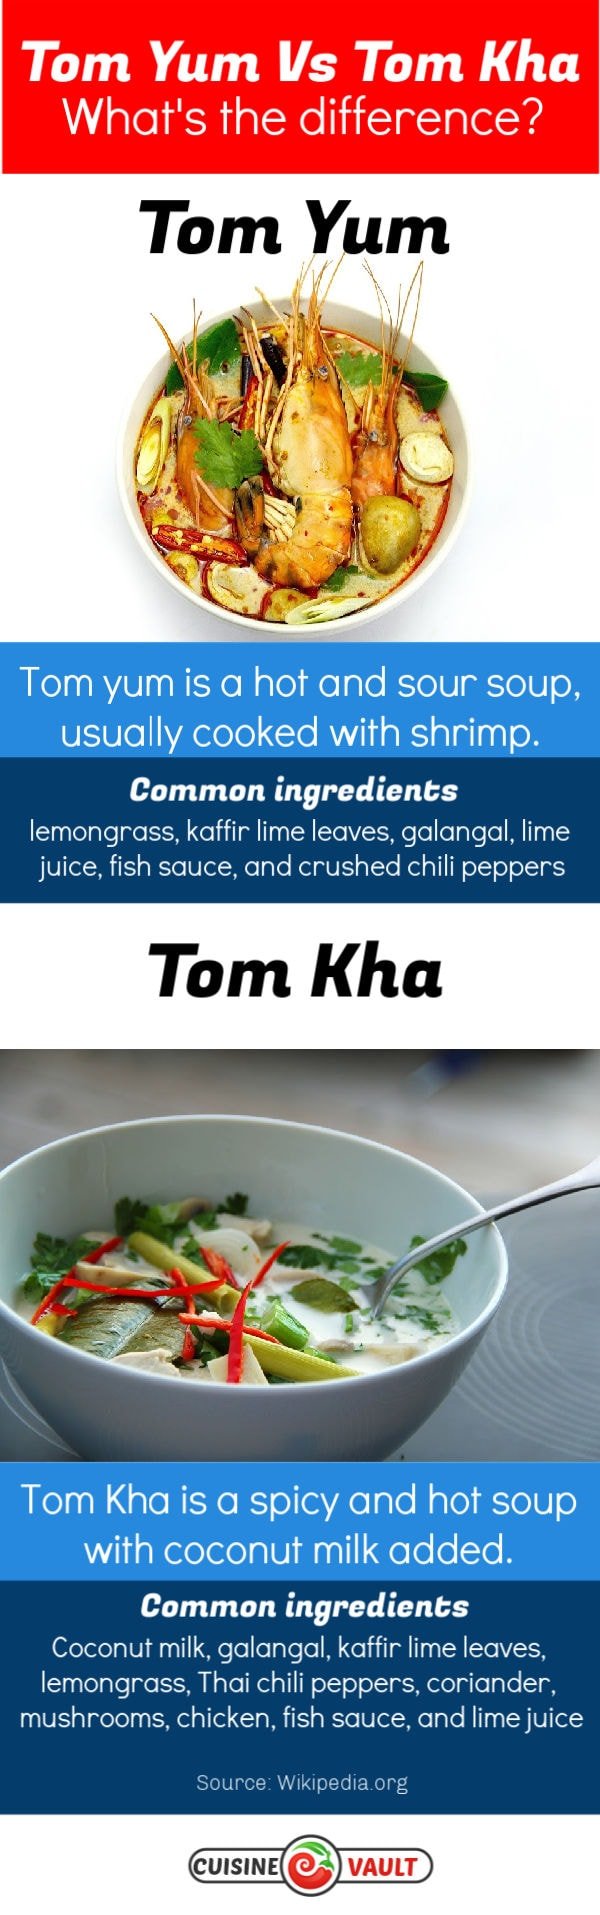 Difference Between Tom Yum and Tom Kha